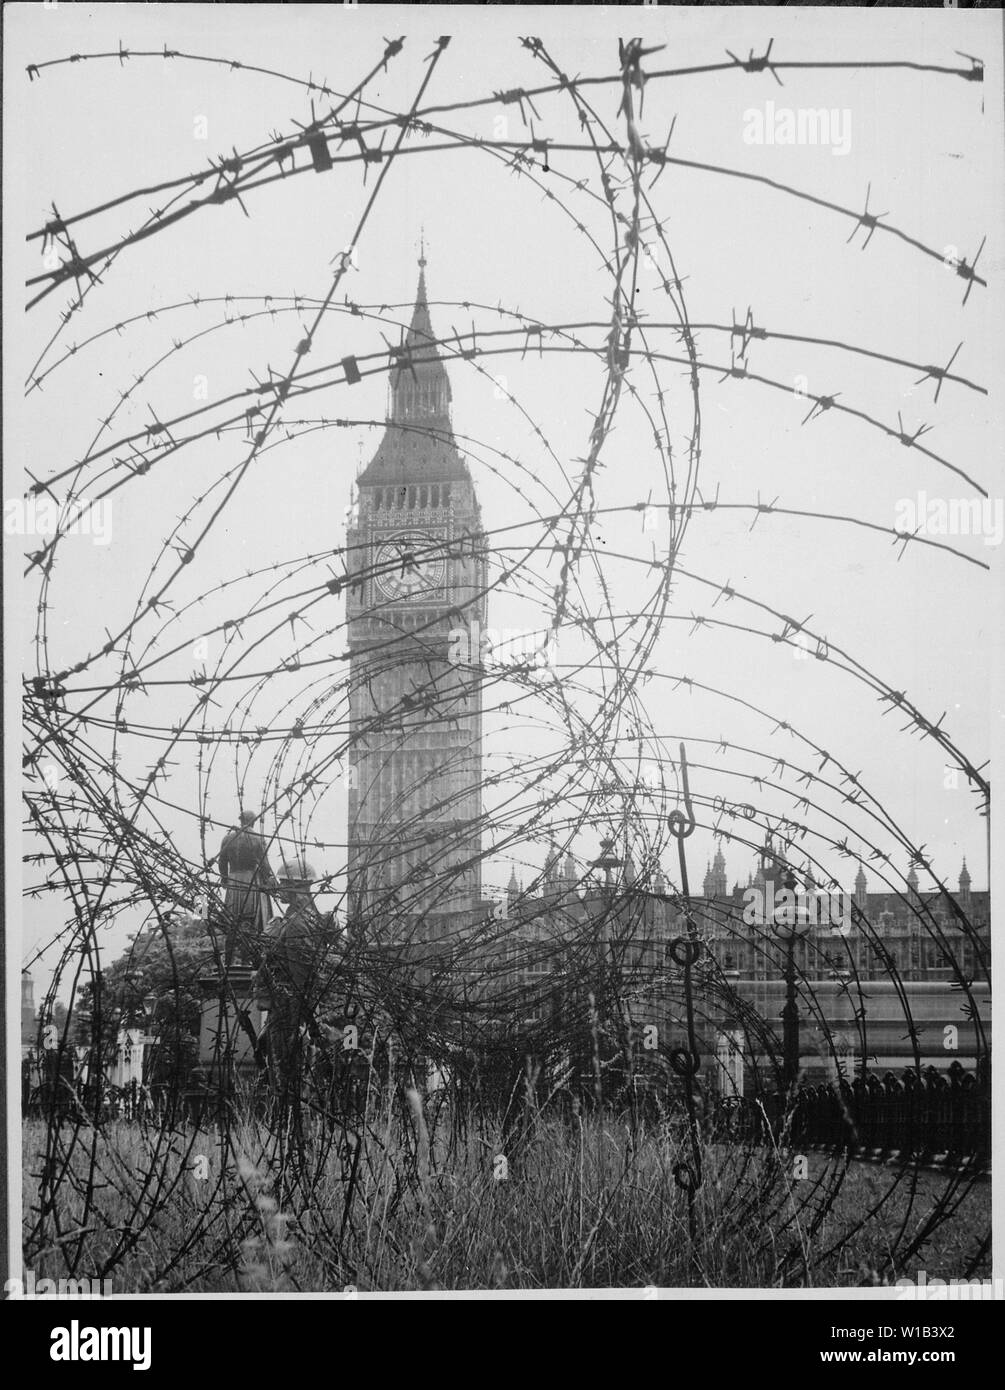 Big Ben and the Houses of Parliament, London. New York Times Paris Bureau  Collection.; General notes: Use War and Conflict Number 1002 when ordering  a reproduction or requesting information about this image.